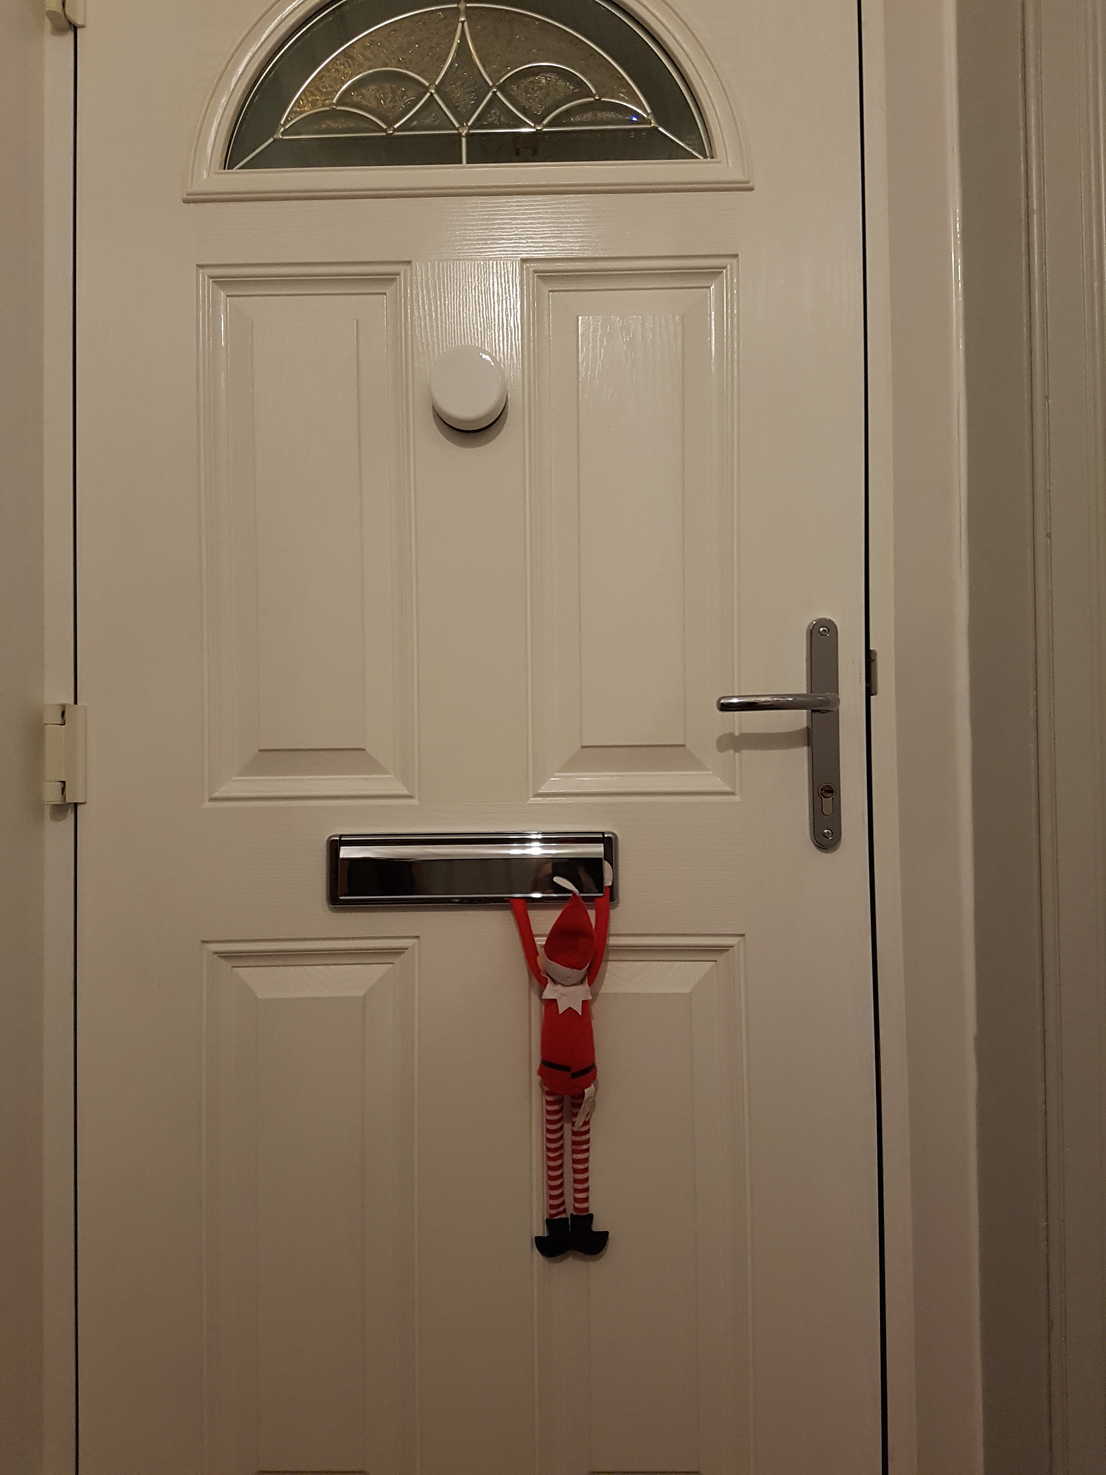 The creepy Elf on the Shelf in the letterbox.